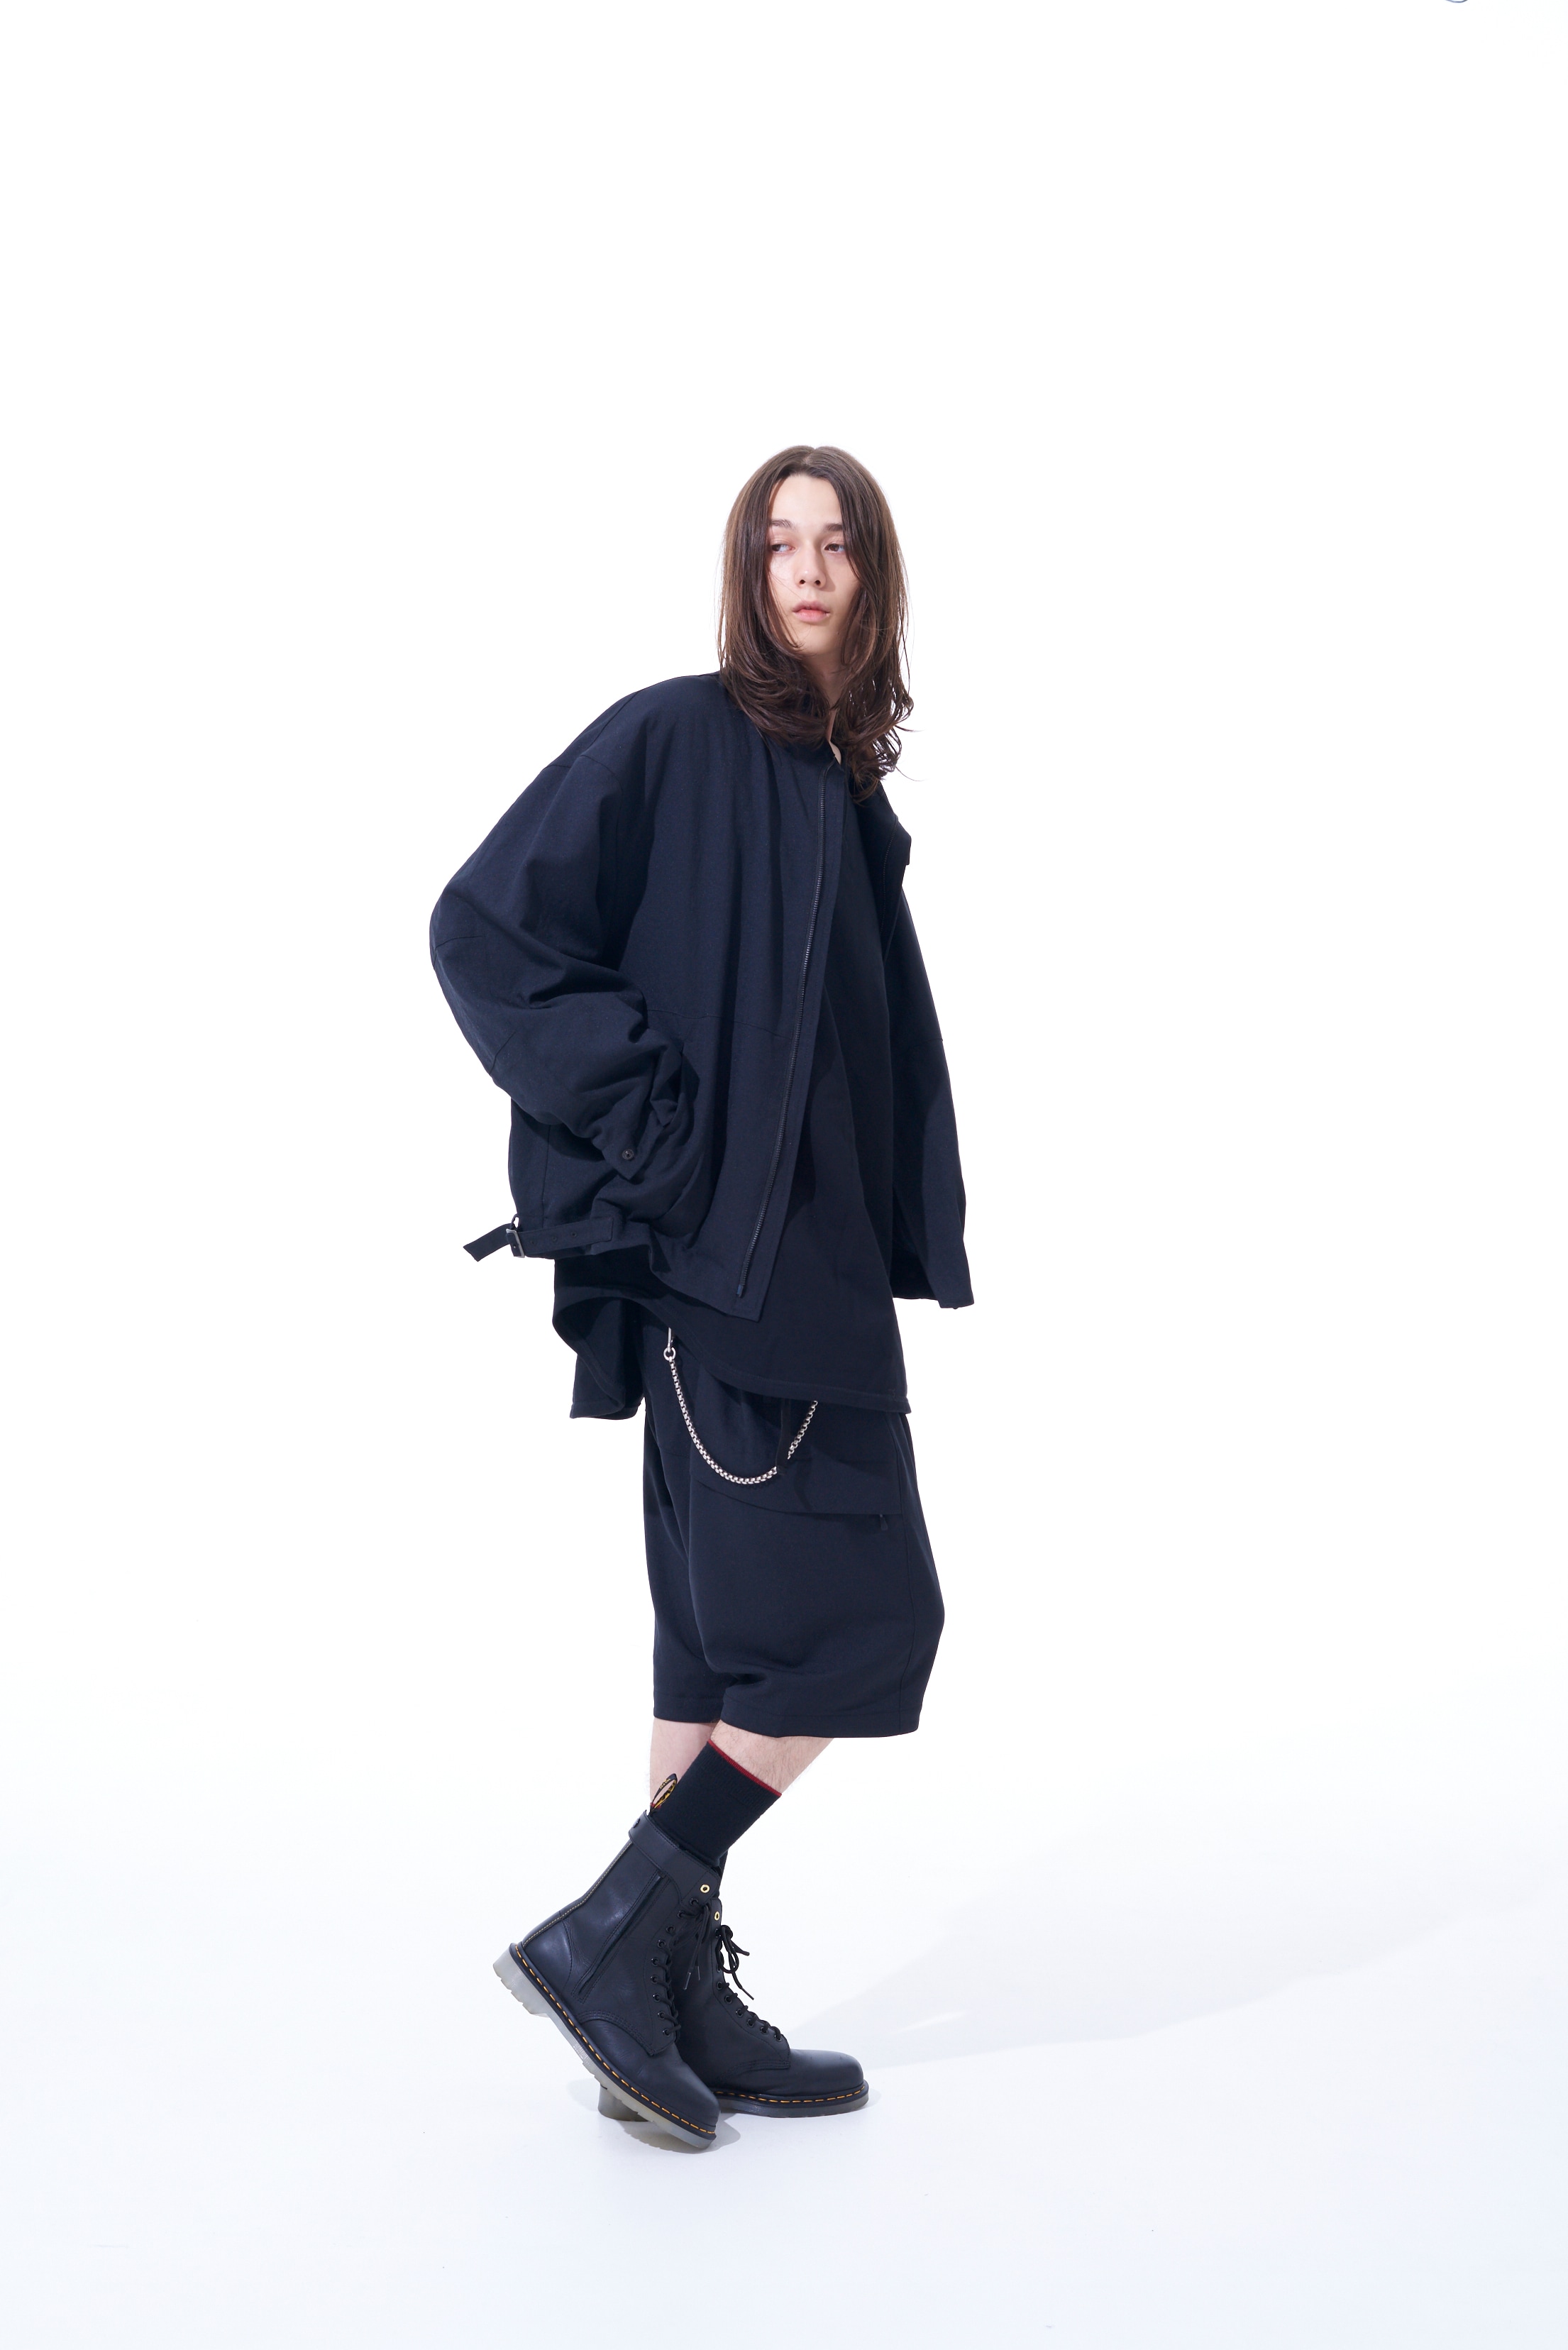 PE/STRETCH TWILL OVERSIZED STAND COLLAR BLOUSON WITH FUNCTIONAL 